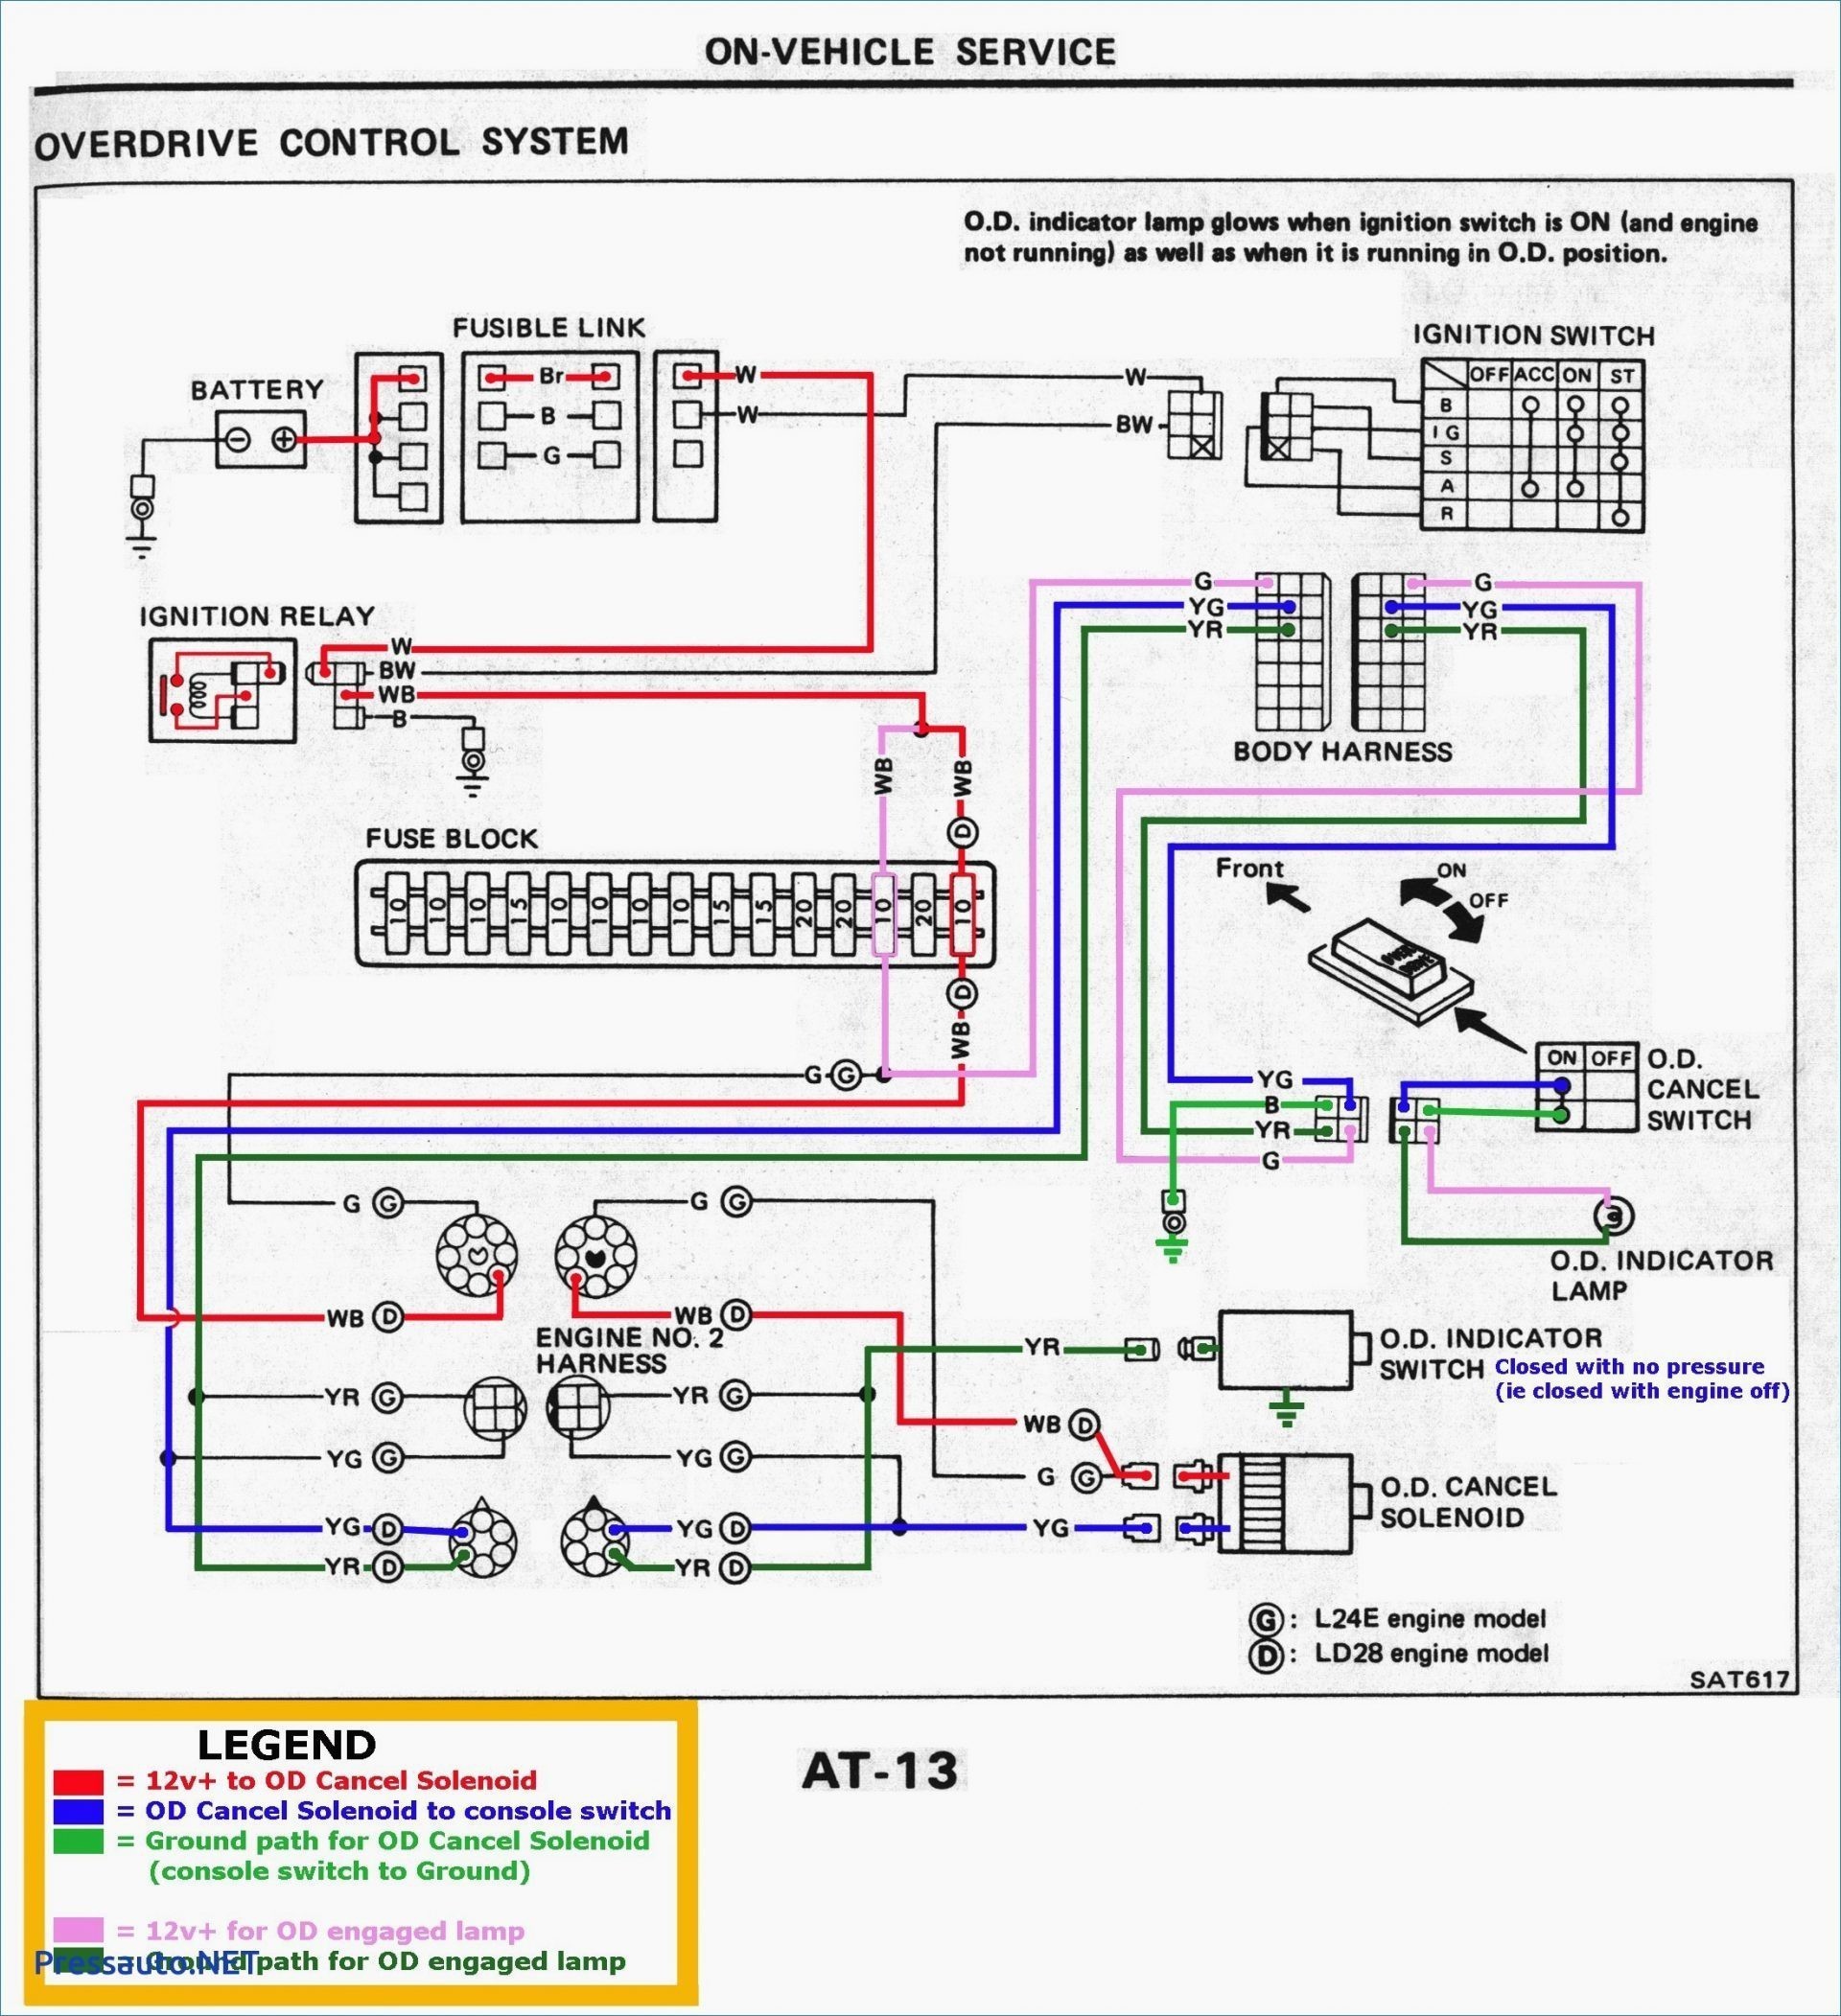 Wiring Diagram For Trailer With Electric Brakes Fresh Trailer Wiring Diagram With Electric Brakes Save Wiring Diagram